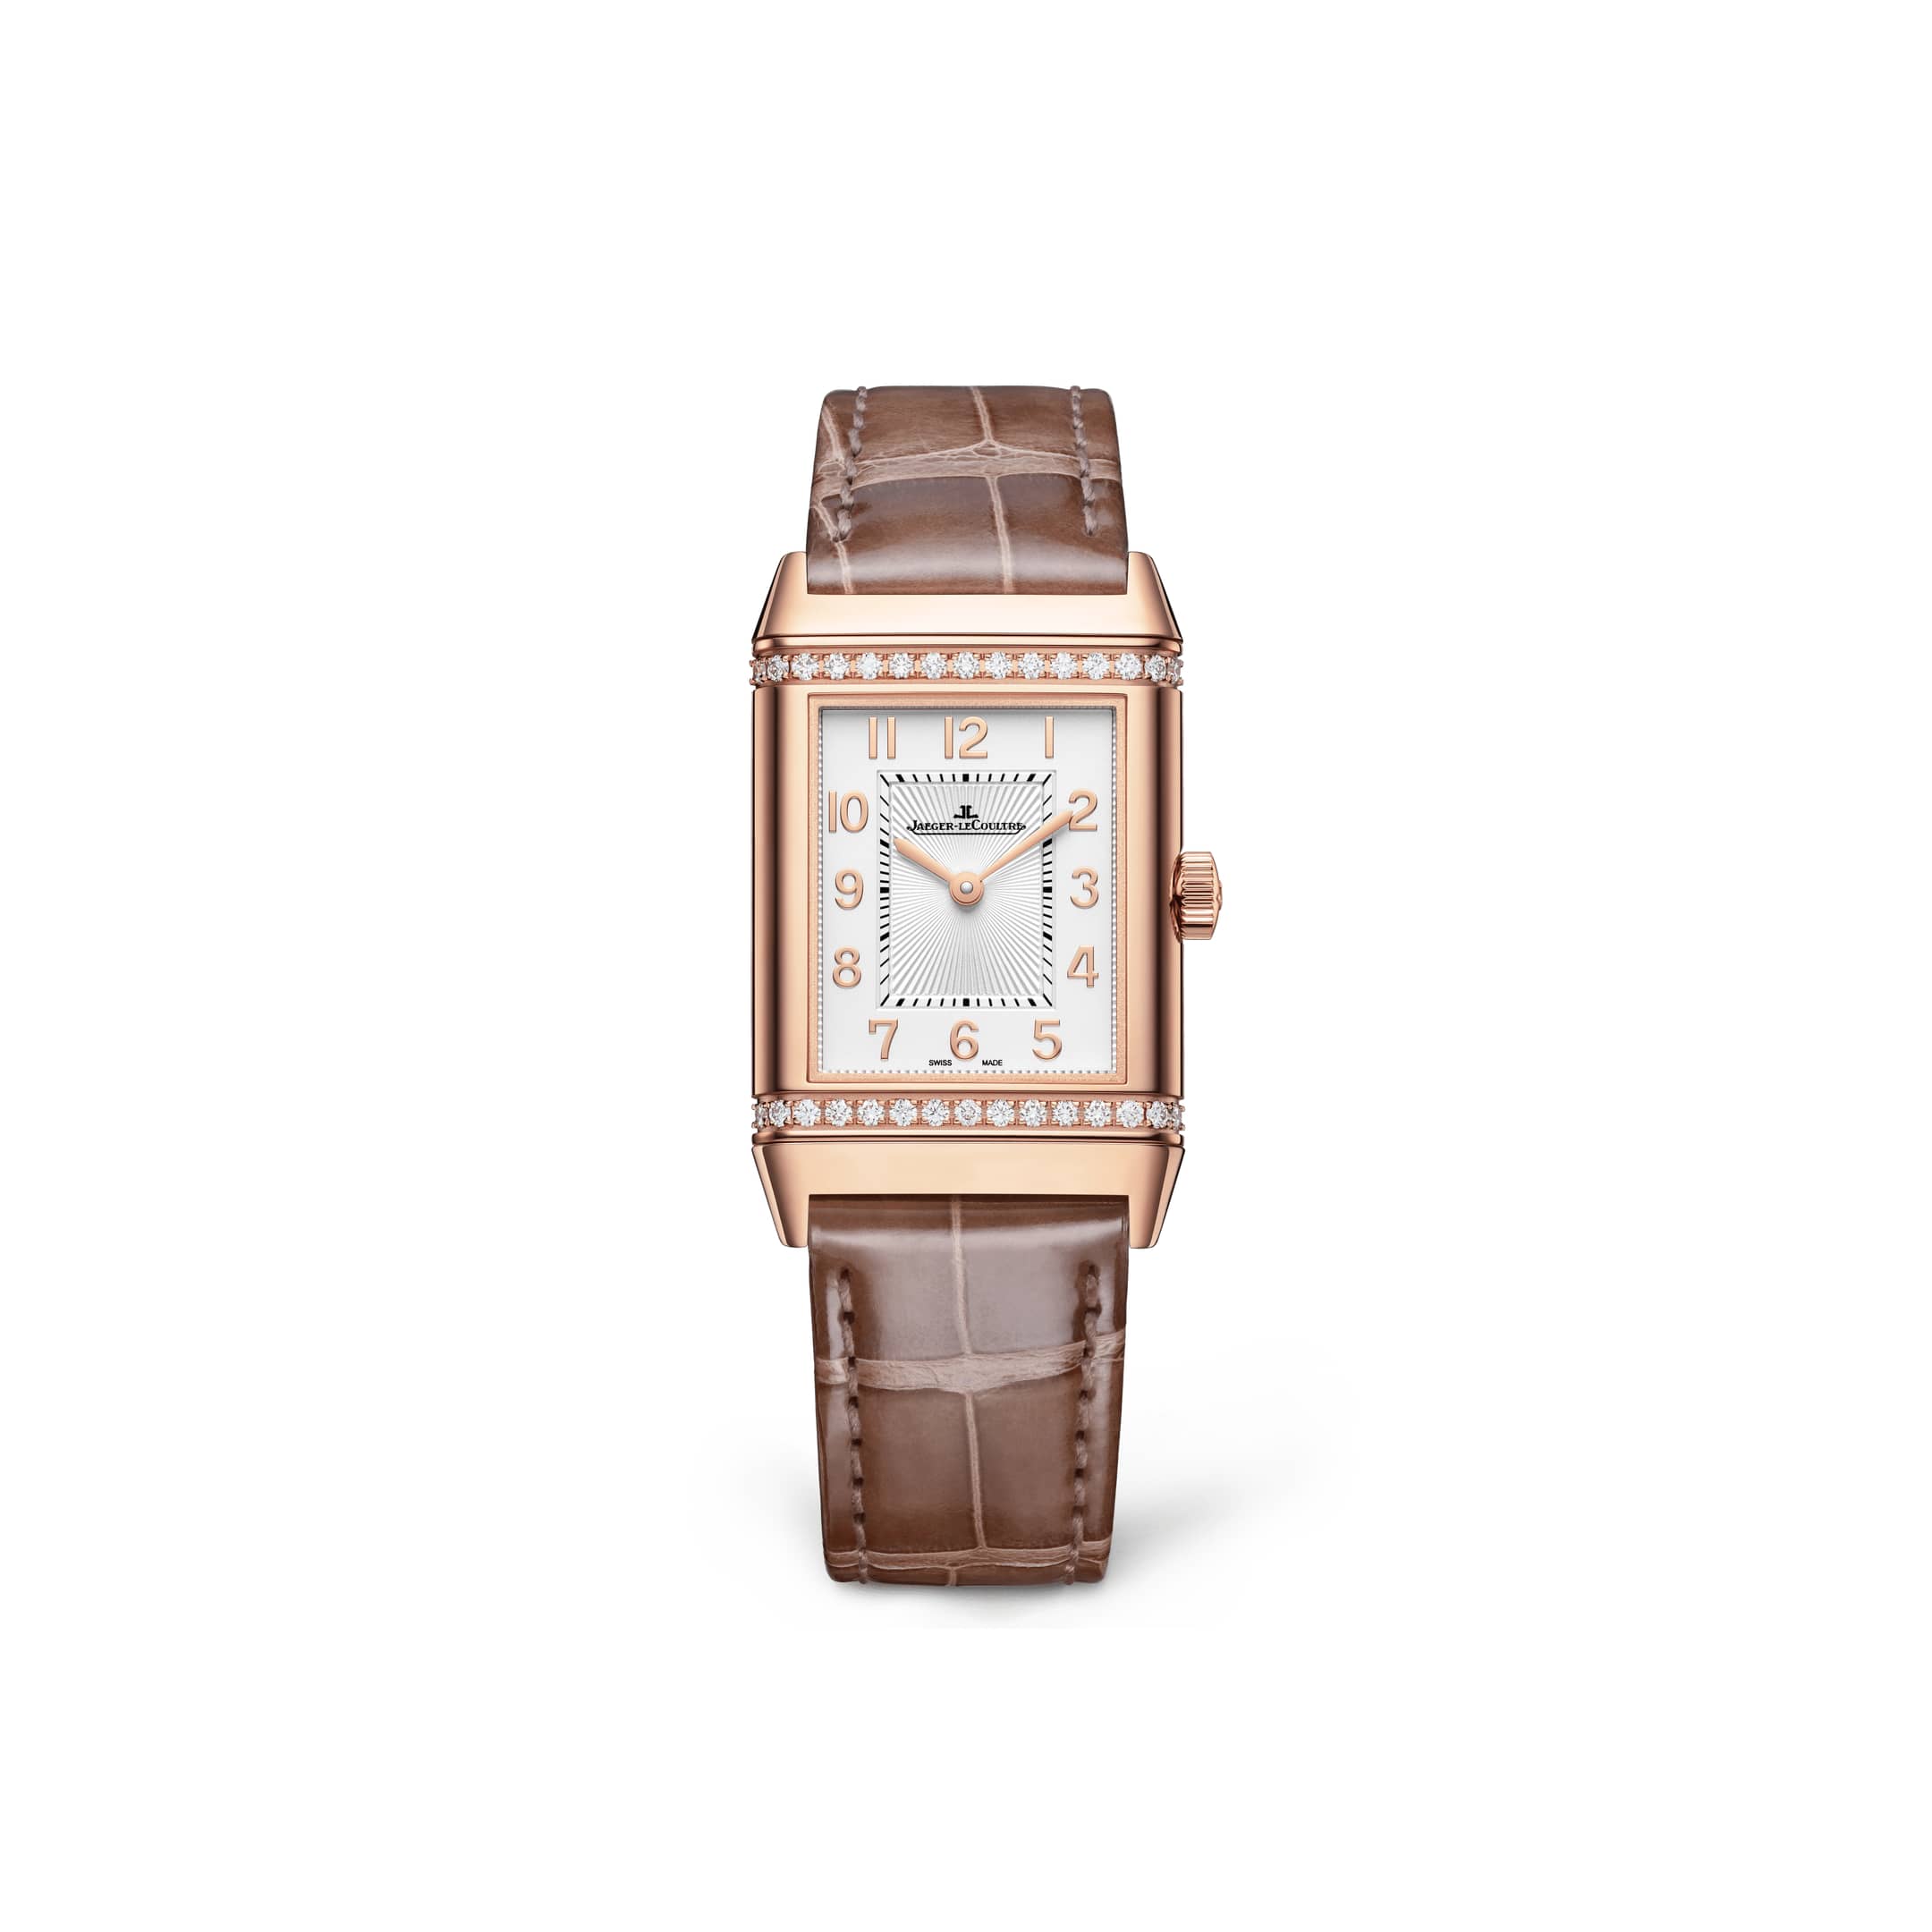 Pink Gold Automatic, Duetto | Jaeger-LeCoultre Reverso Watch Ladies Medium 2572570 self-winding Classic